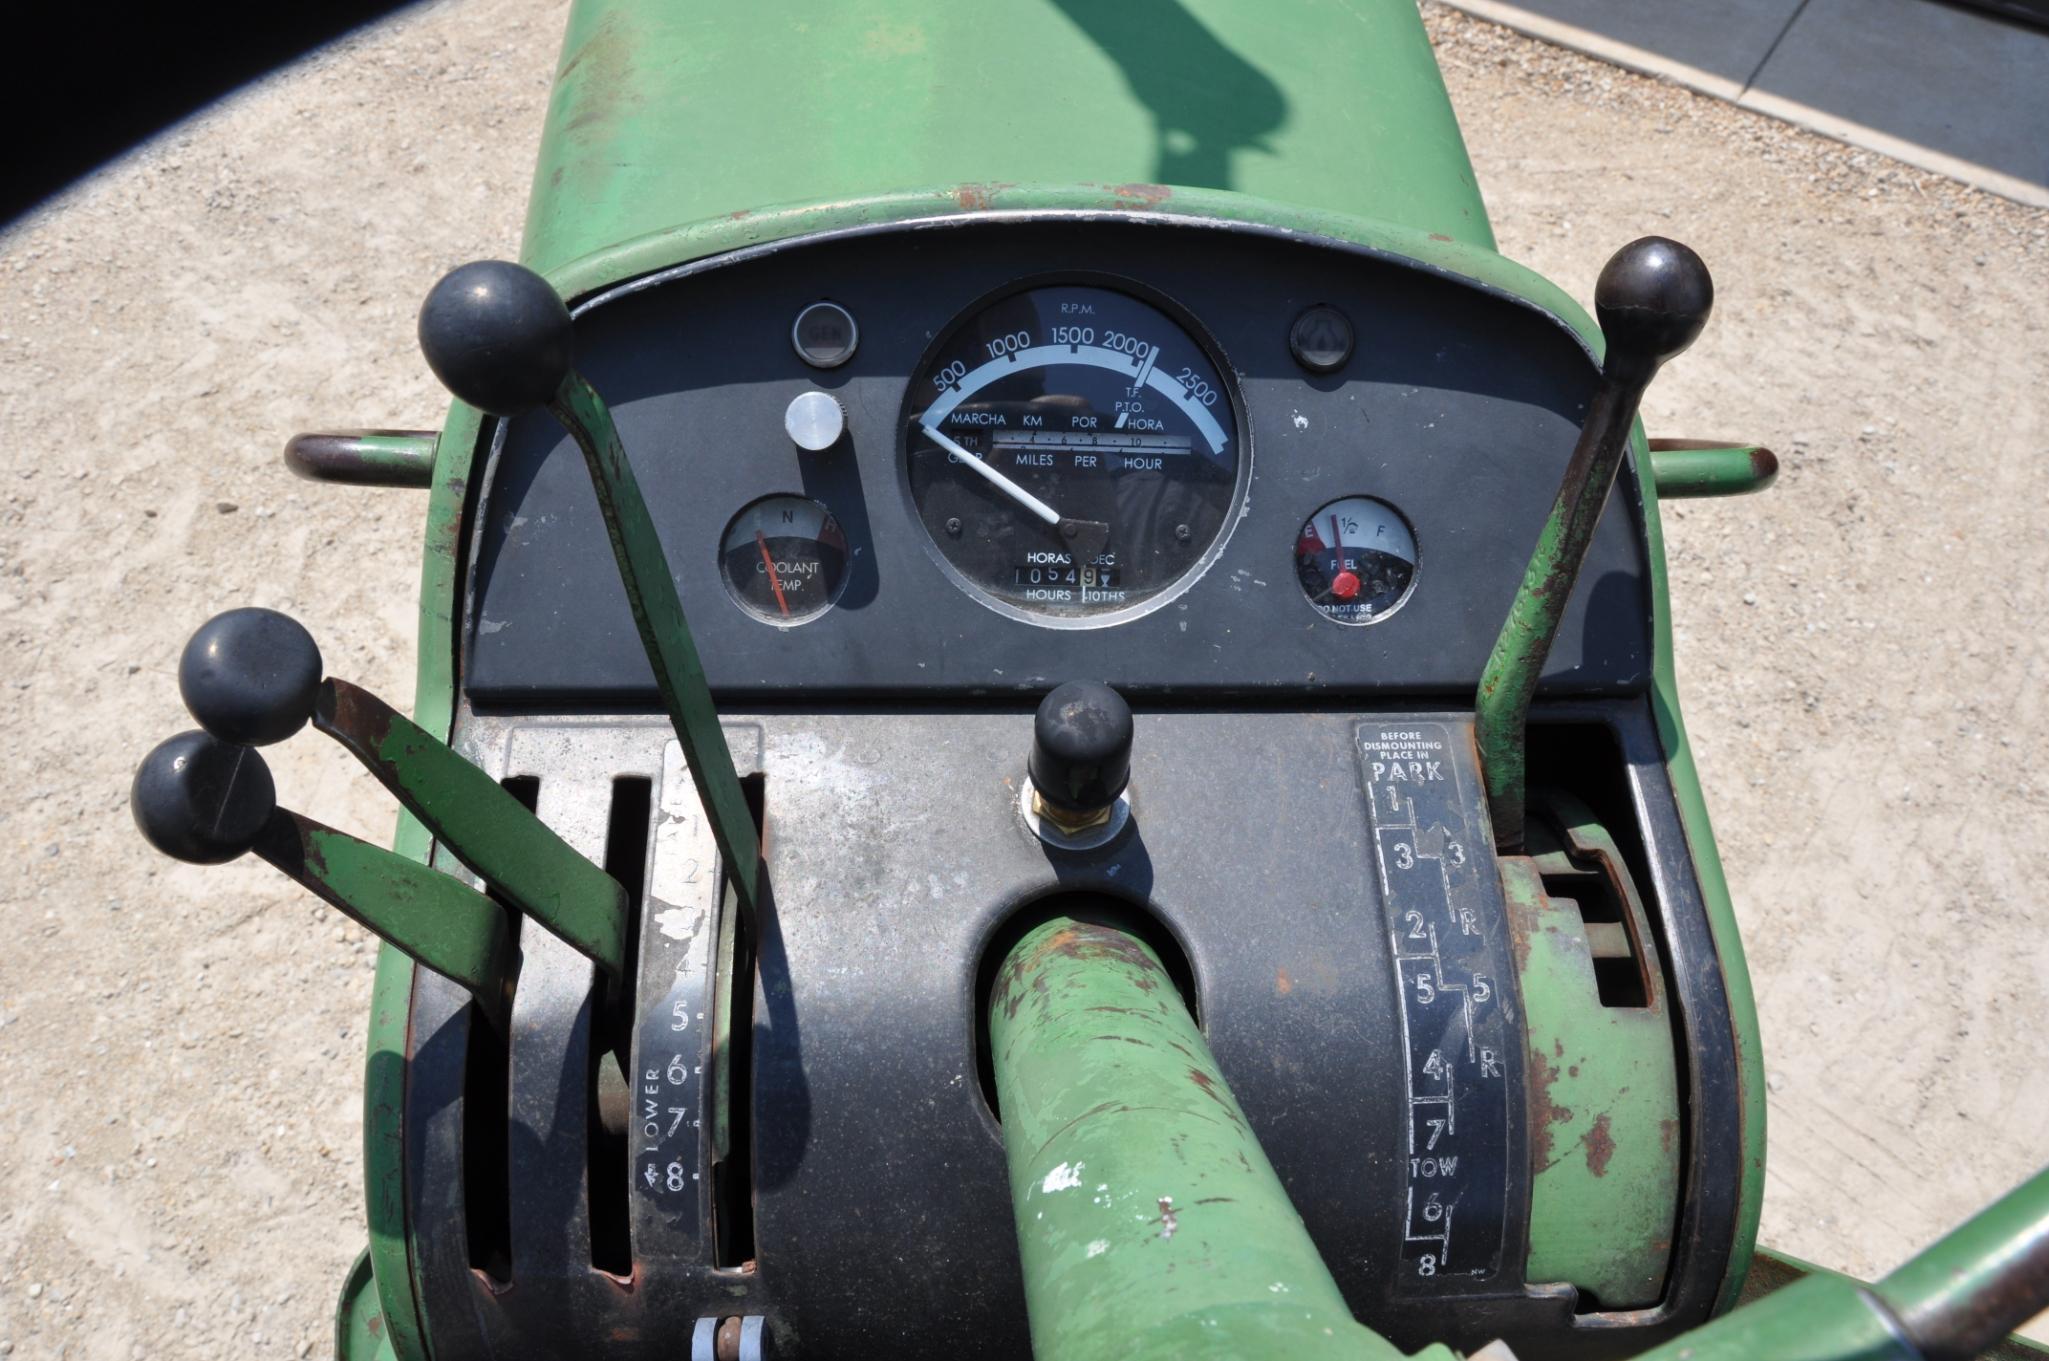 1967 JD 3020 2wd tractor